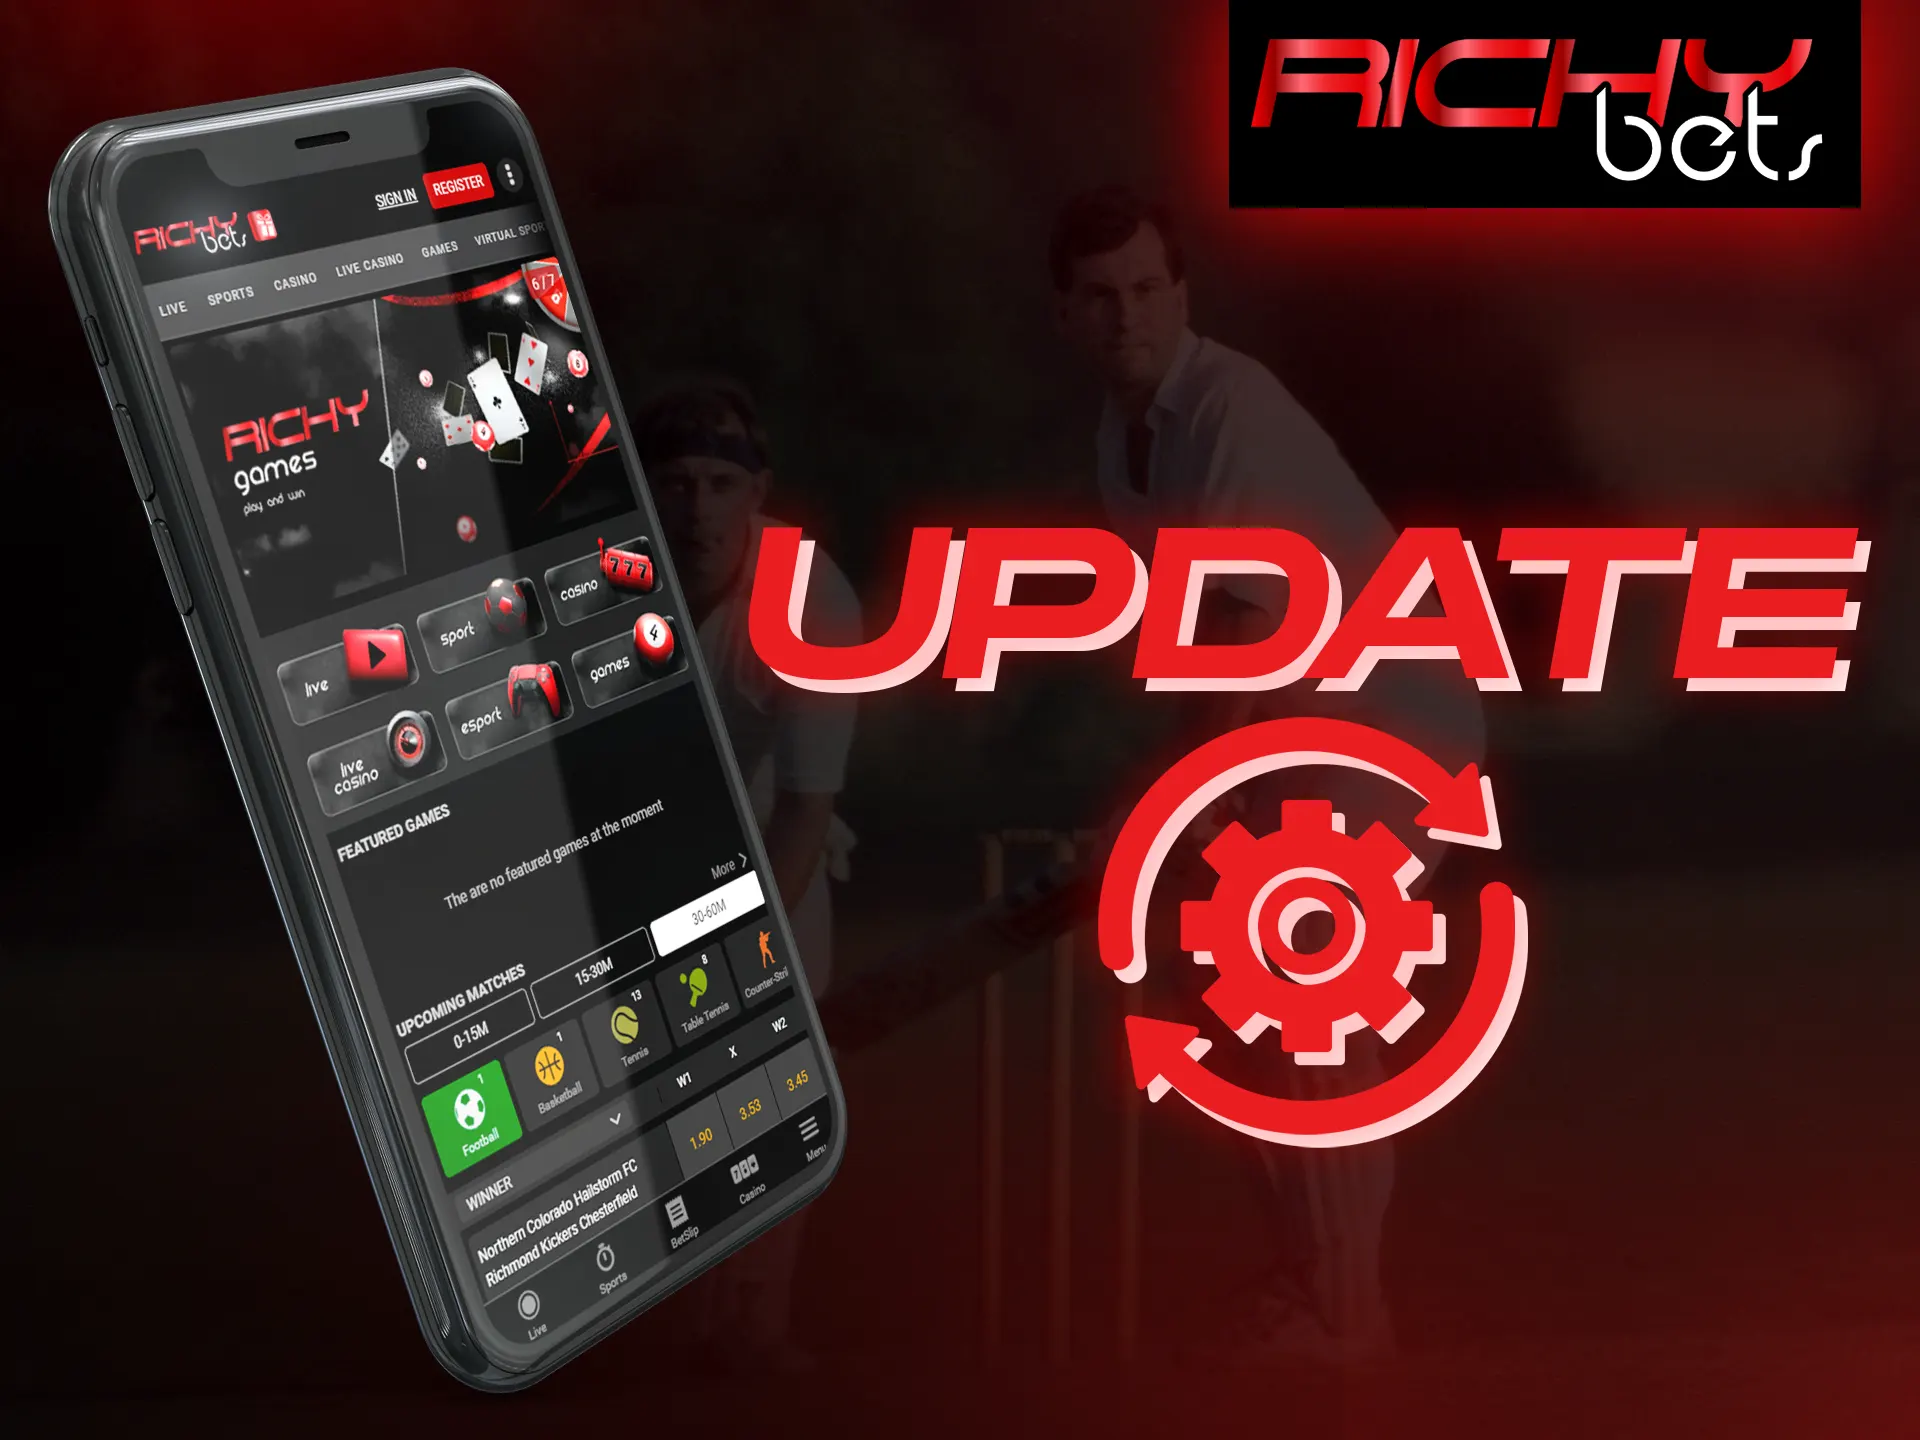 The Richybets app updates automatically after each start.